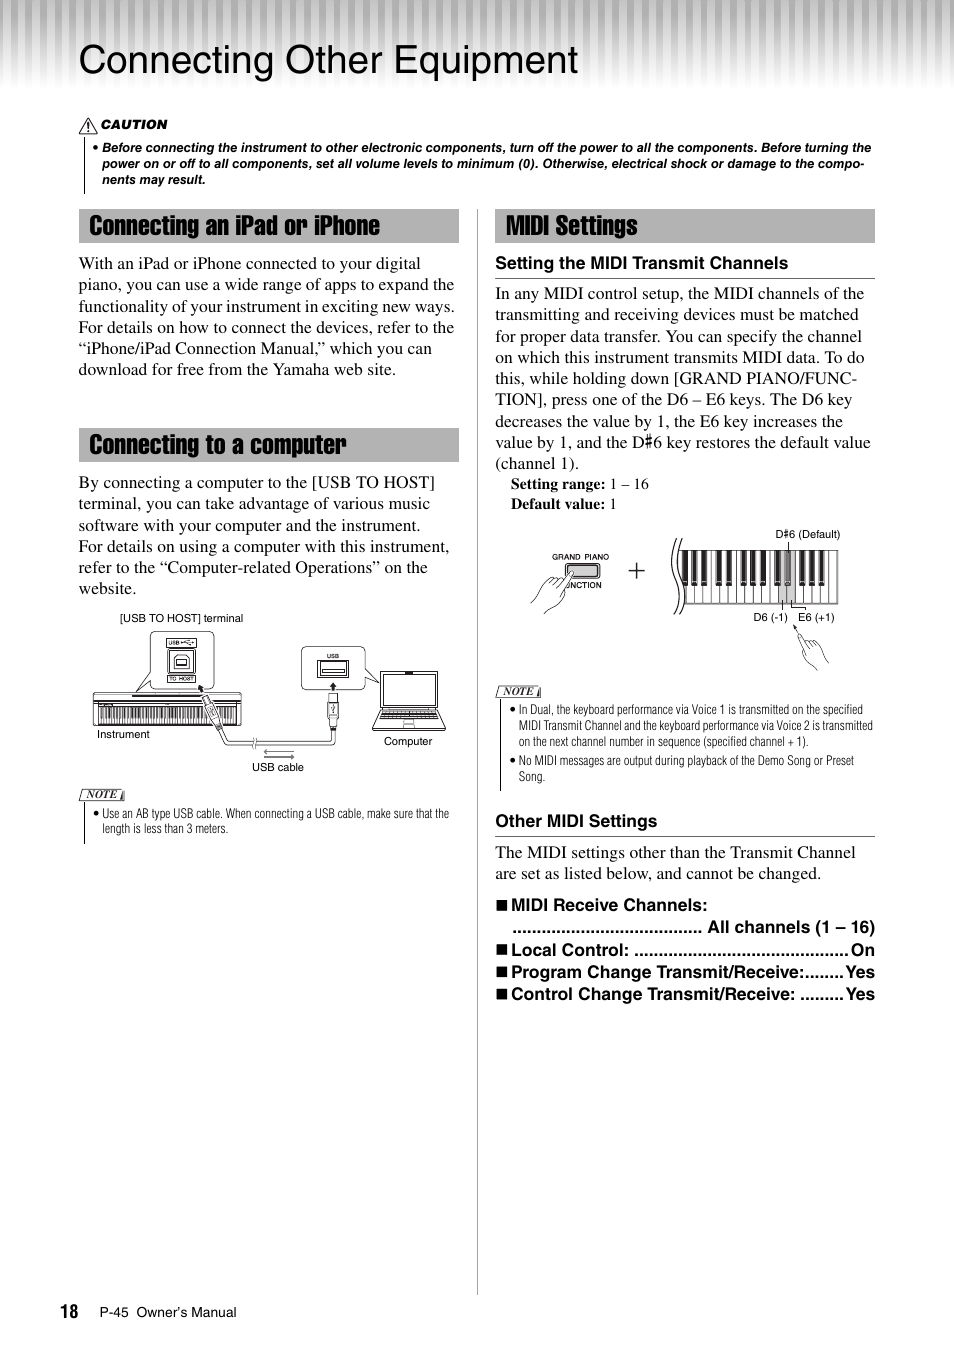 Connecting other equipment, Connecting an ipad or iphone, Connecting to a computer | Midi settings | Yamaha P-45 User Manual | Page 18 / 24